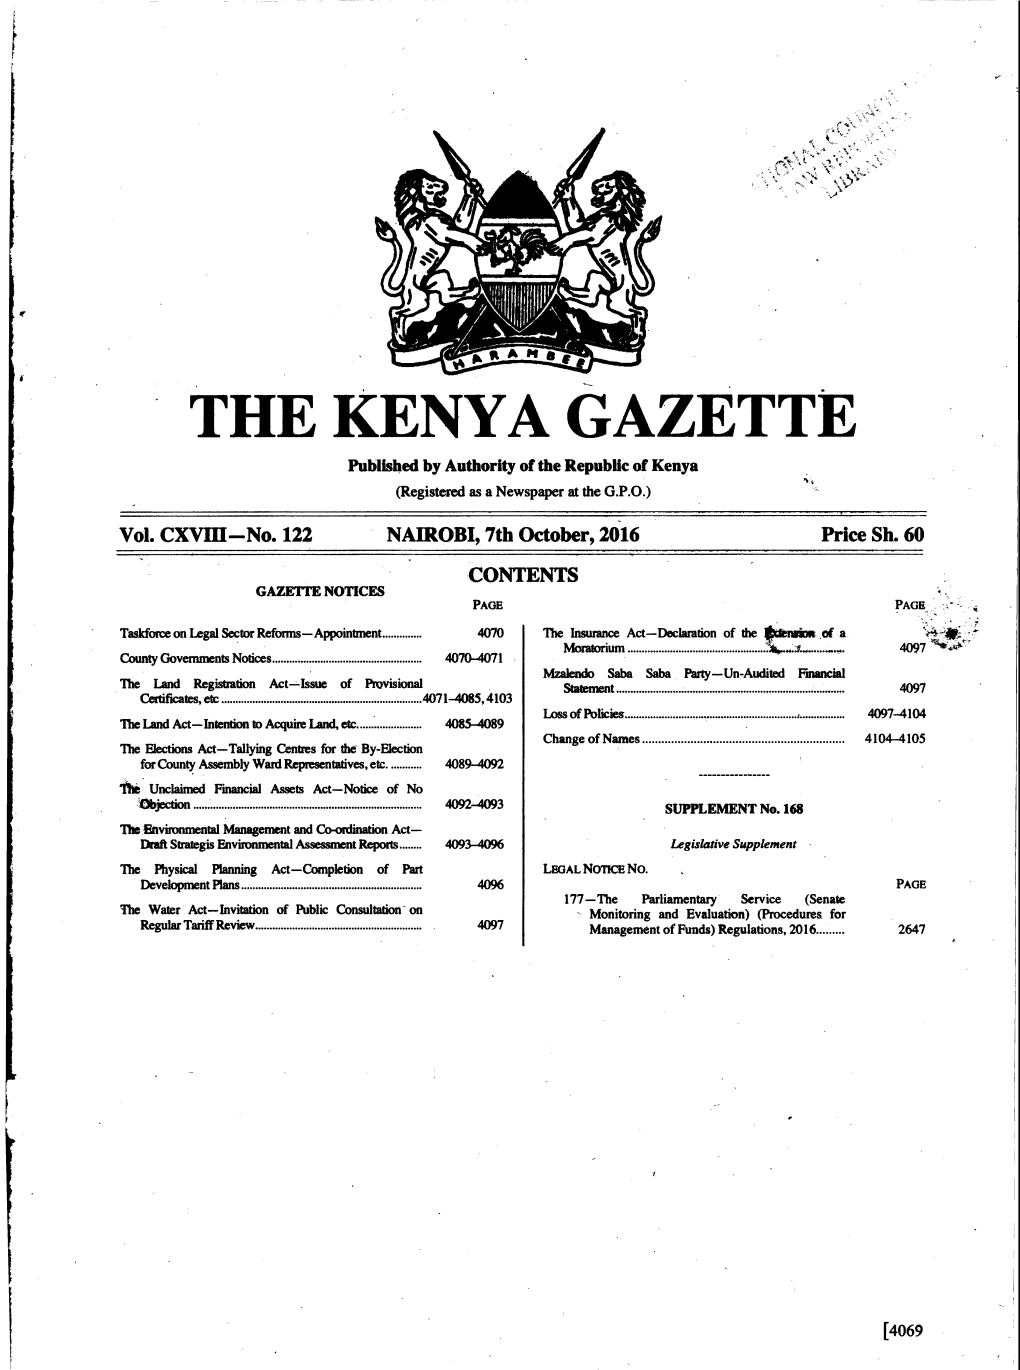 THEKENYAGAZETTE Publtshed by Authority of the Republtc of Kenya *T* (Registered As a Newspaper at the G.P.O.)